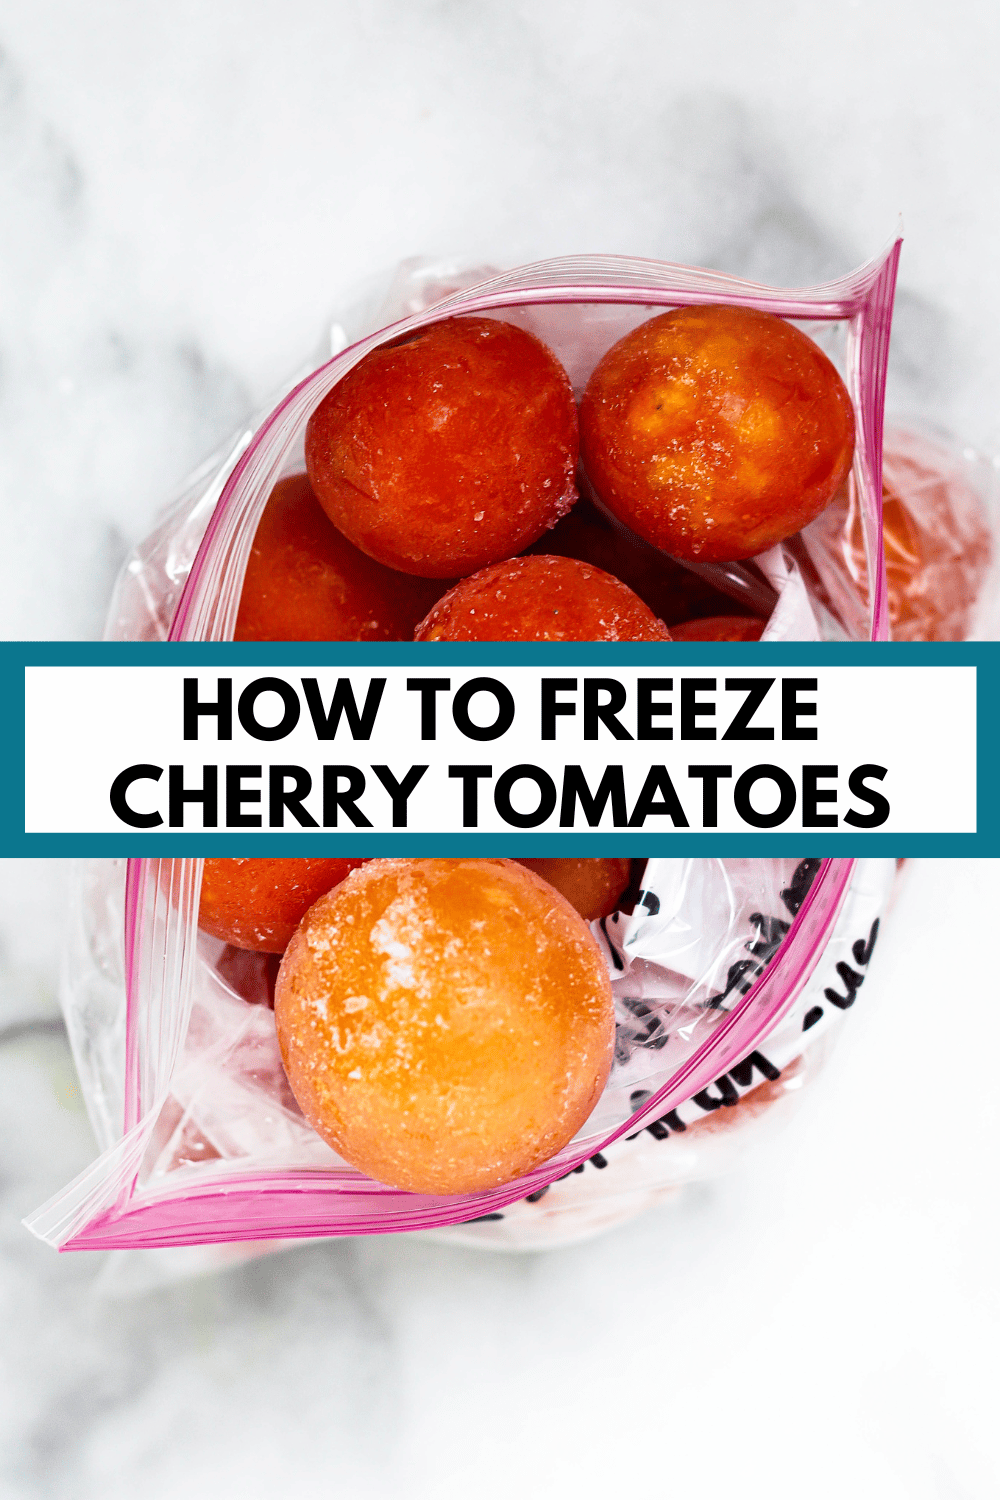 frozen tomatoes in a bag with text: "how to freeze cherry tomatoes"